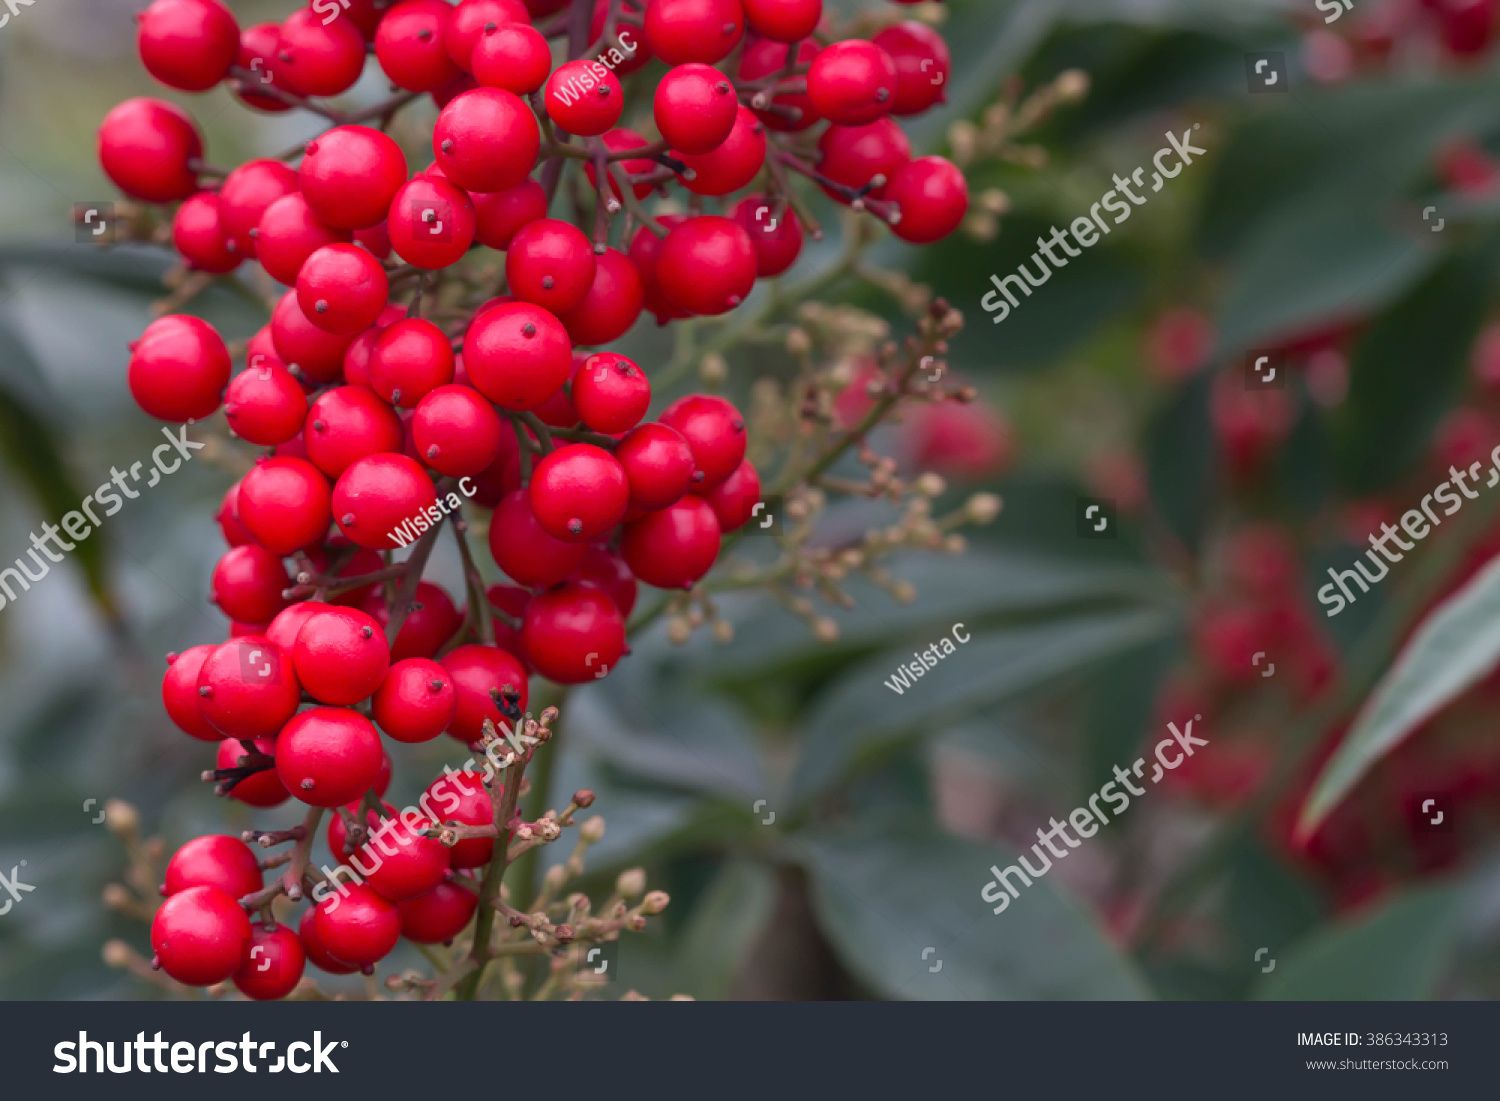 small red fruit stock photo 386343313 - shutterstock